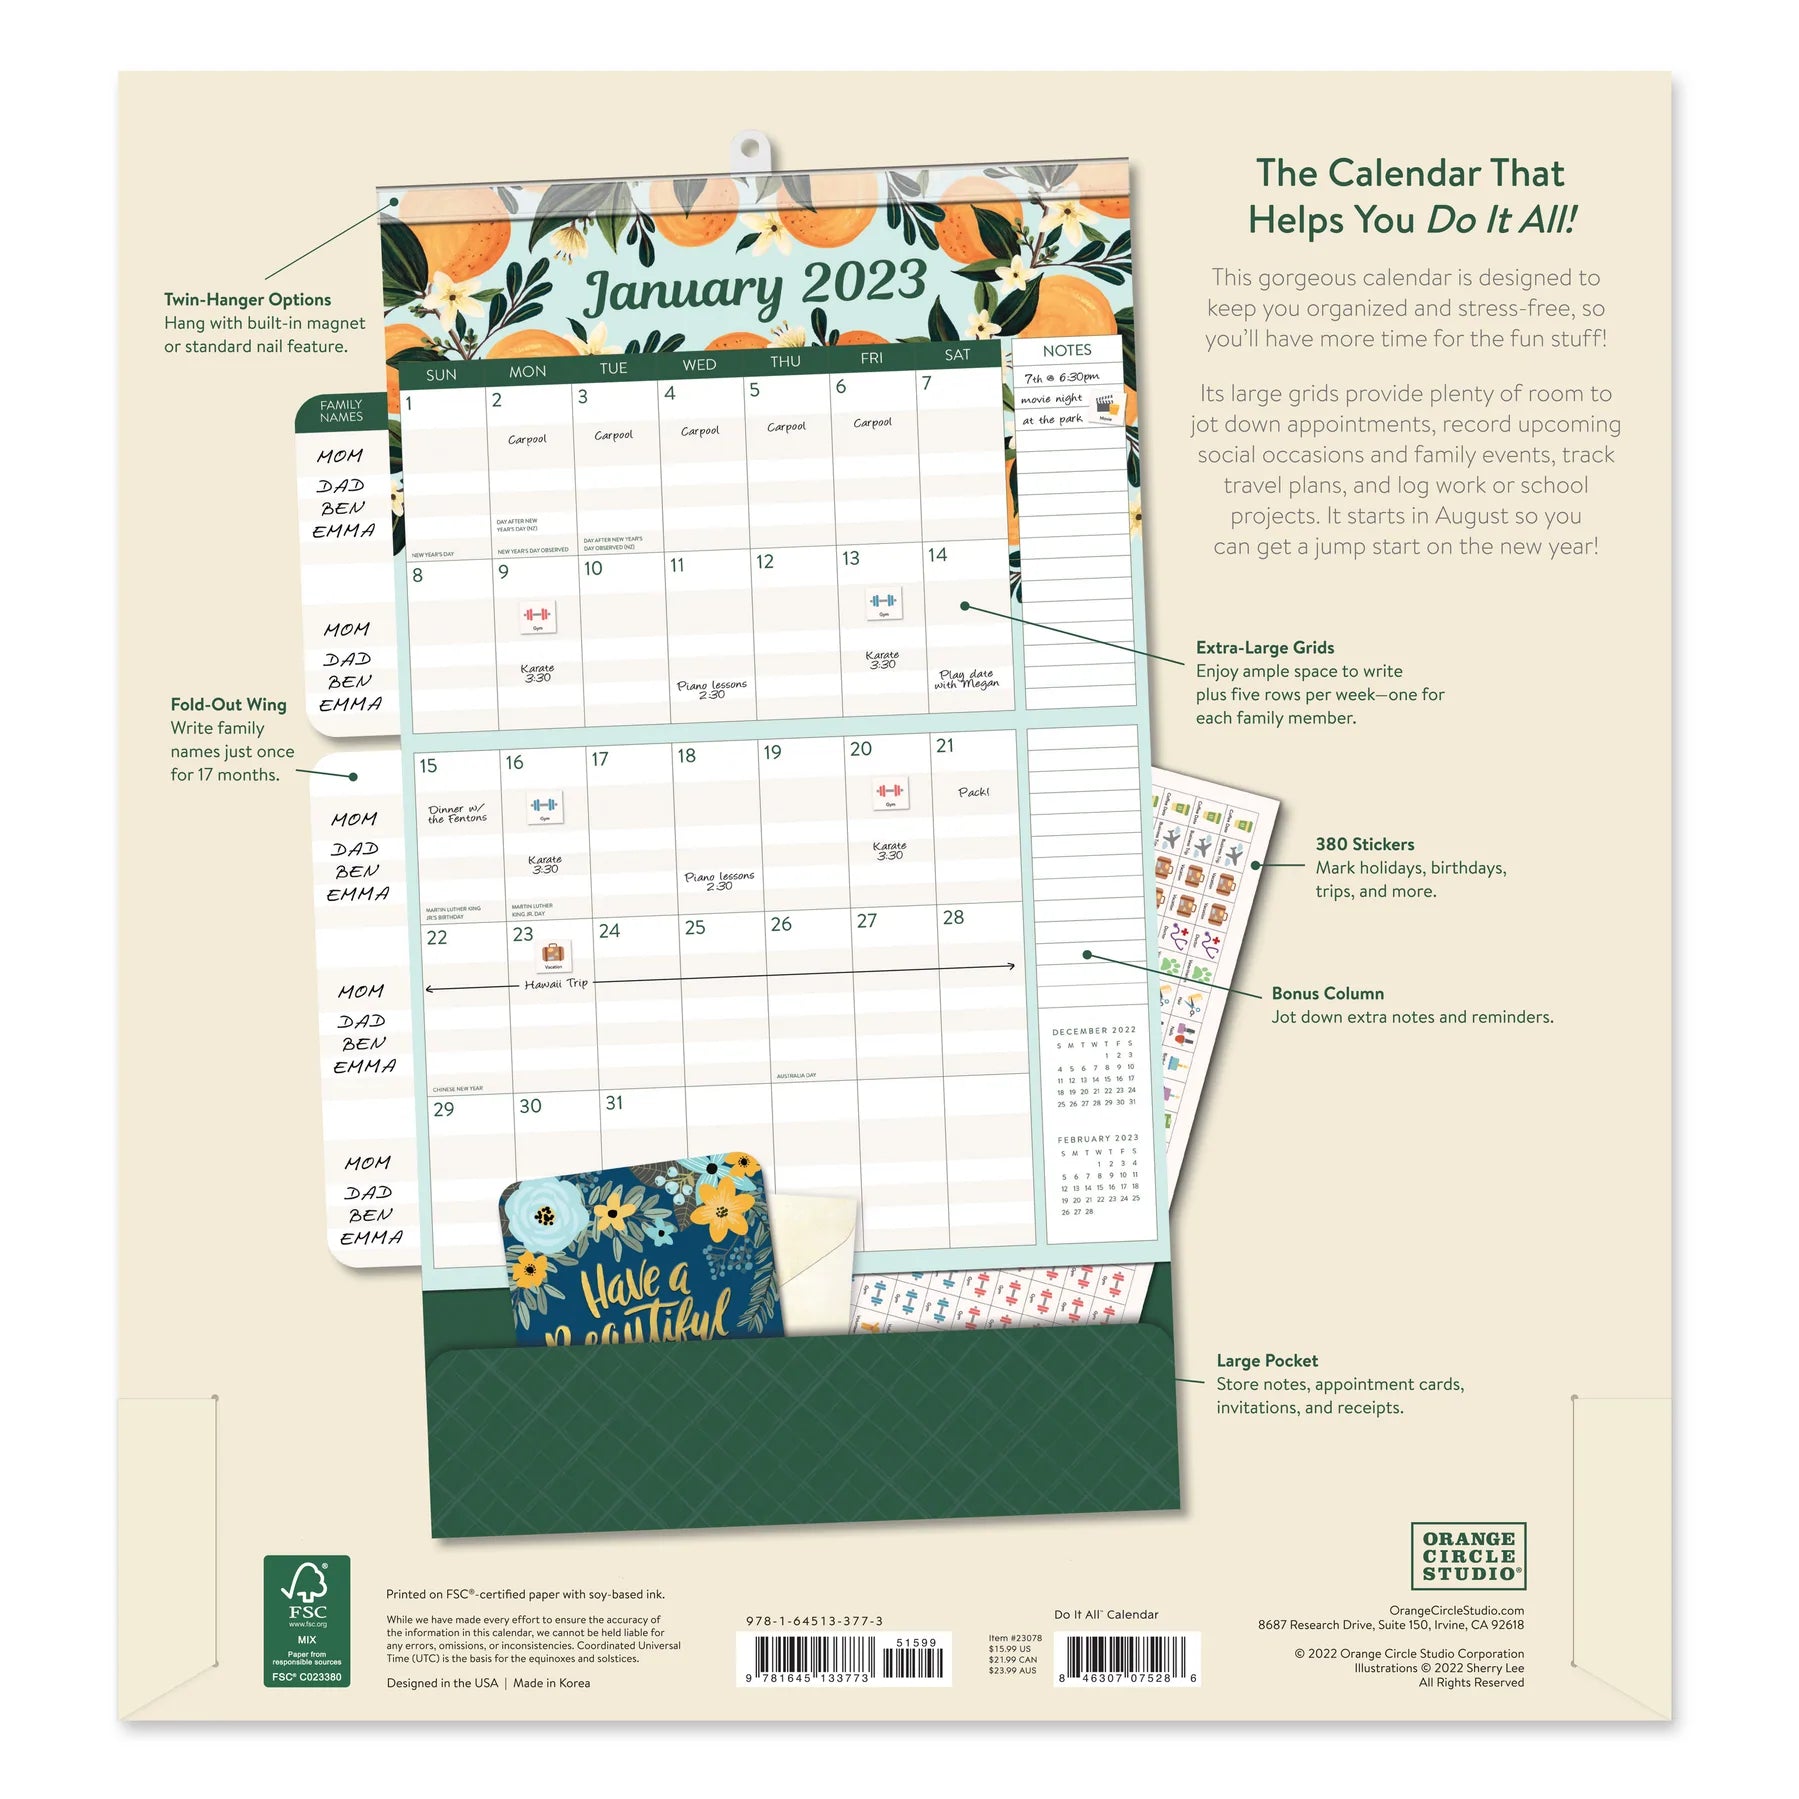 2023 Fruit and Flora by Sherry Lee (Do It All Family Planner) - Magnetic Deluxe Wall Calendar